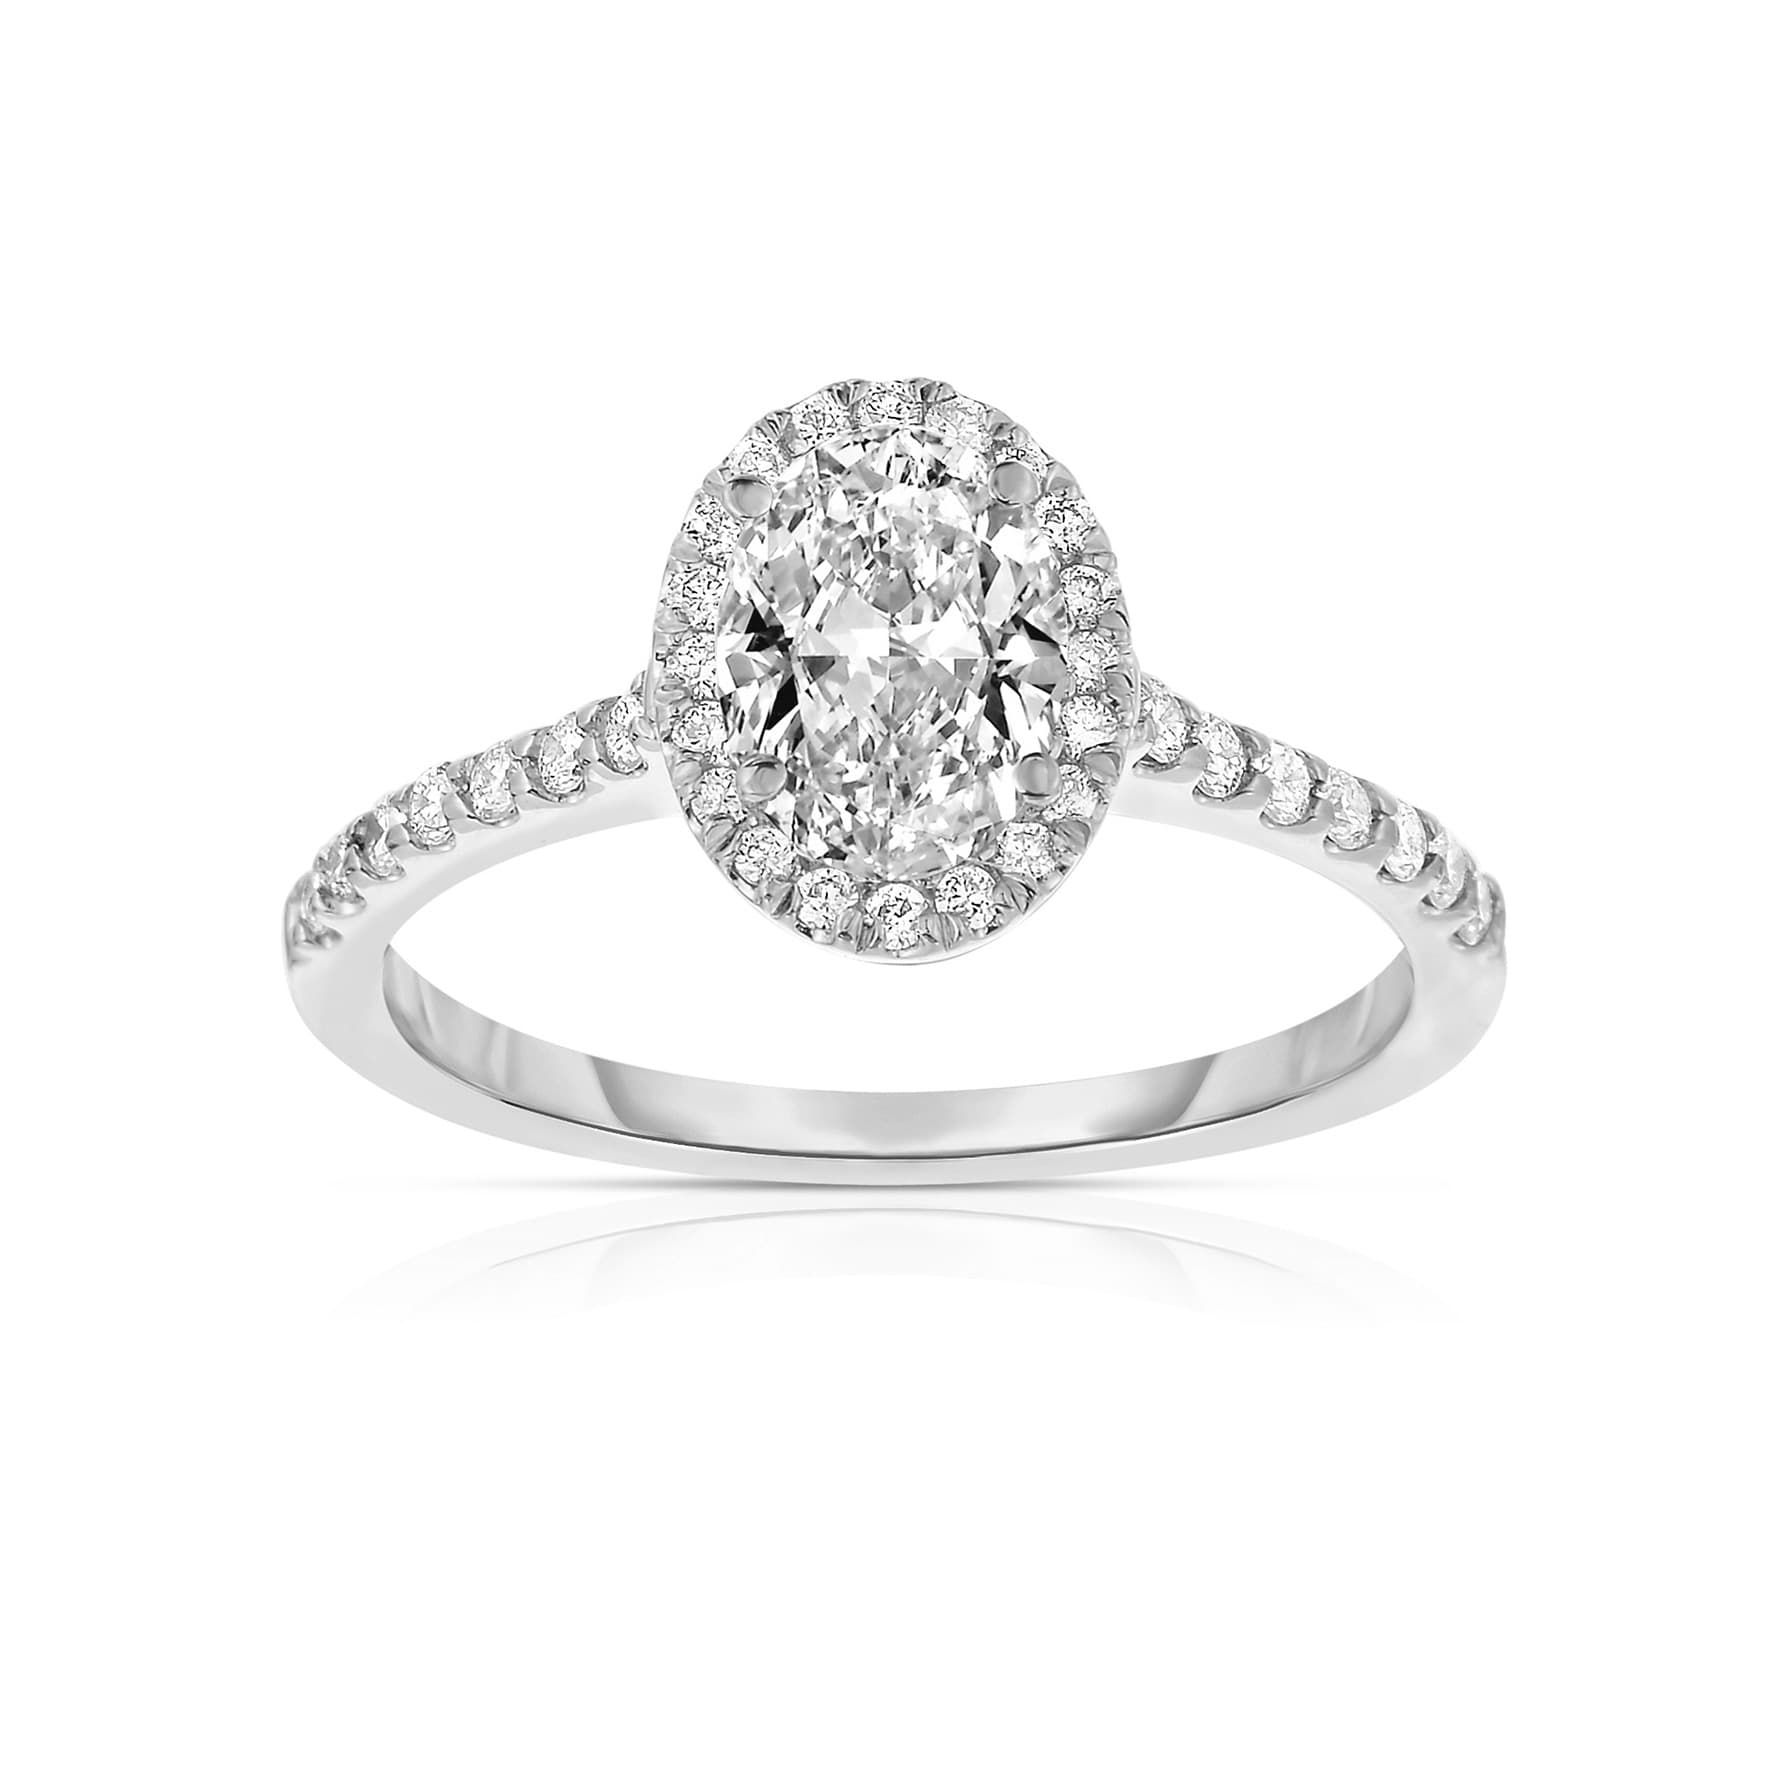 White Gold 1.00 CTW Oval Diamond Halo Engagement Ring 0